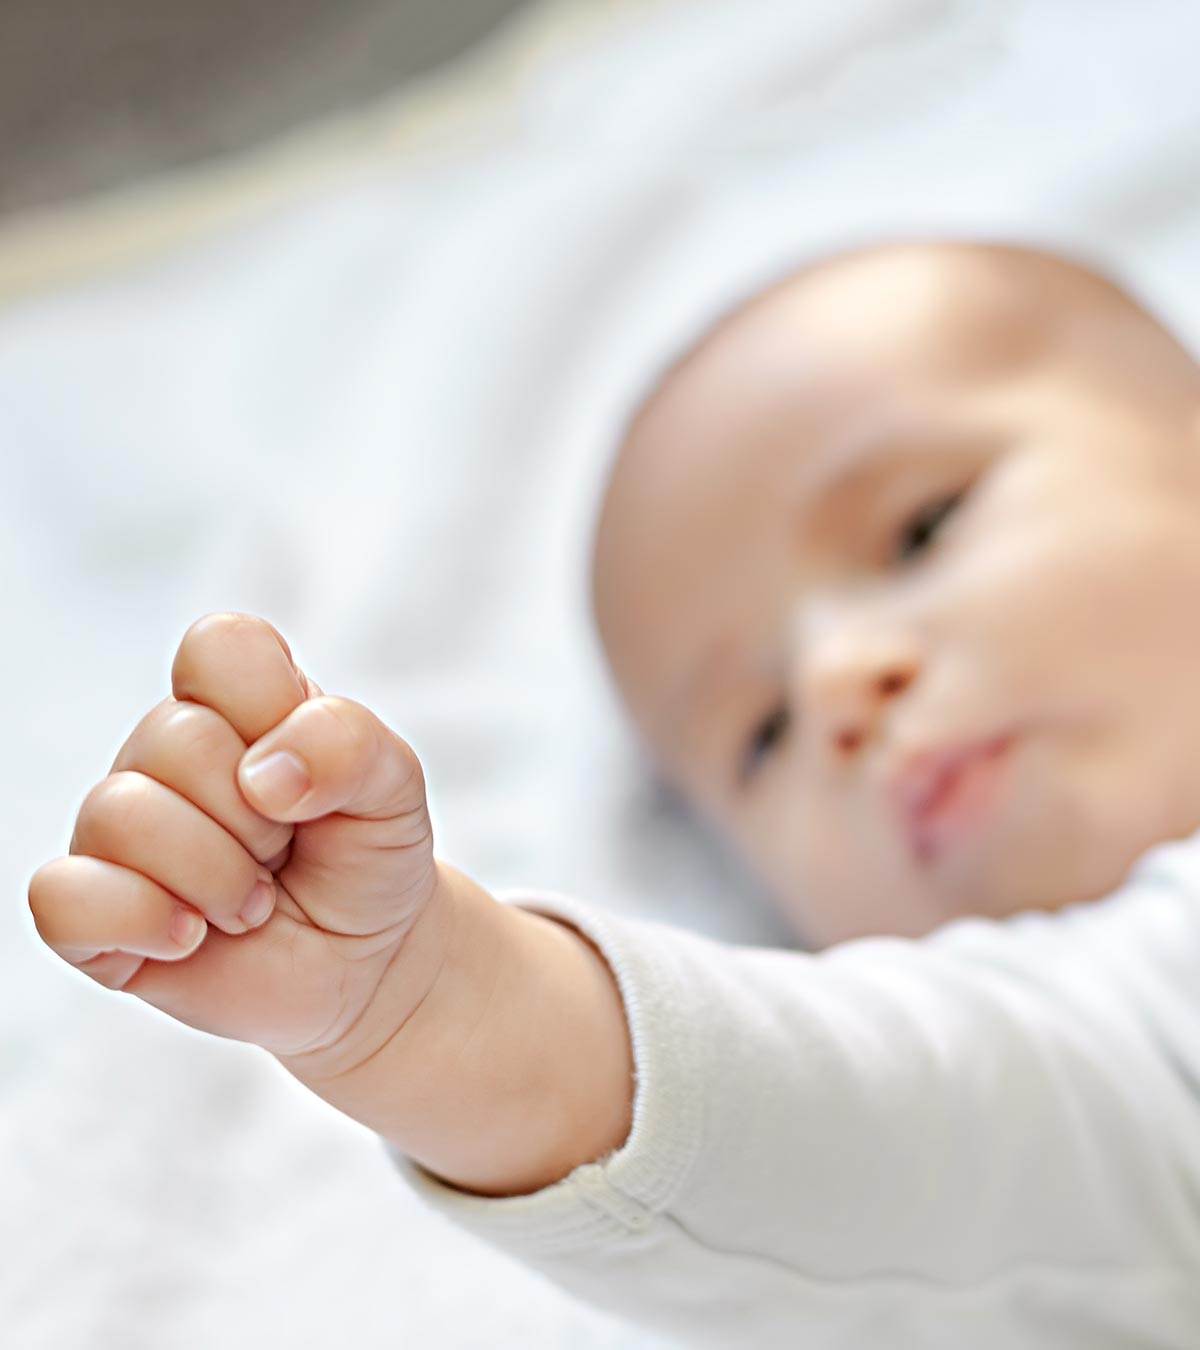 85 Strong And Powerful Baby Boy Names With Great Meanings